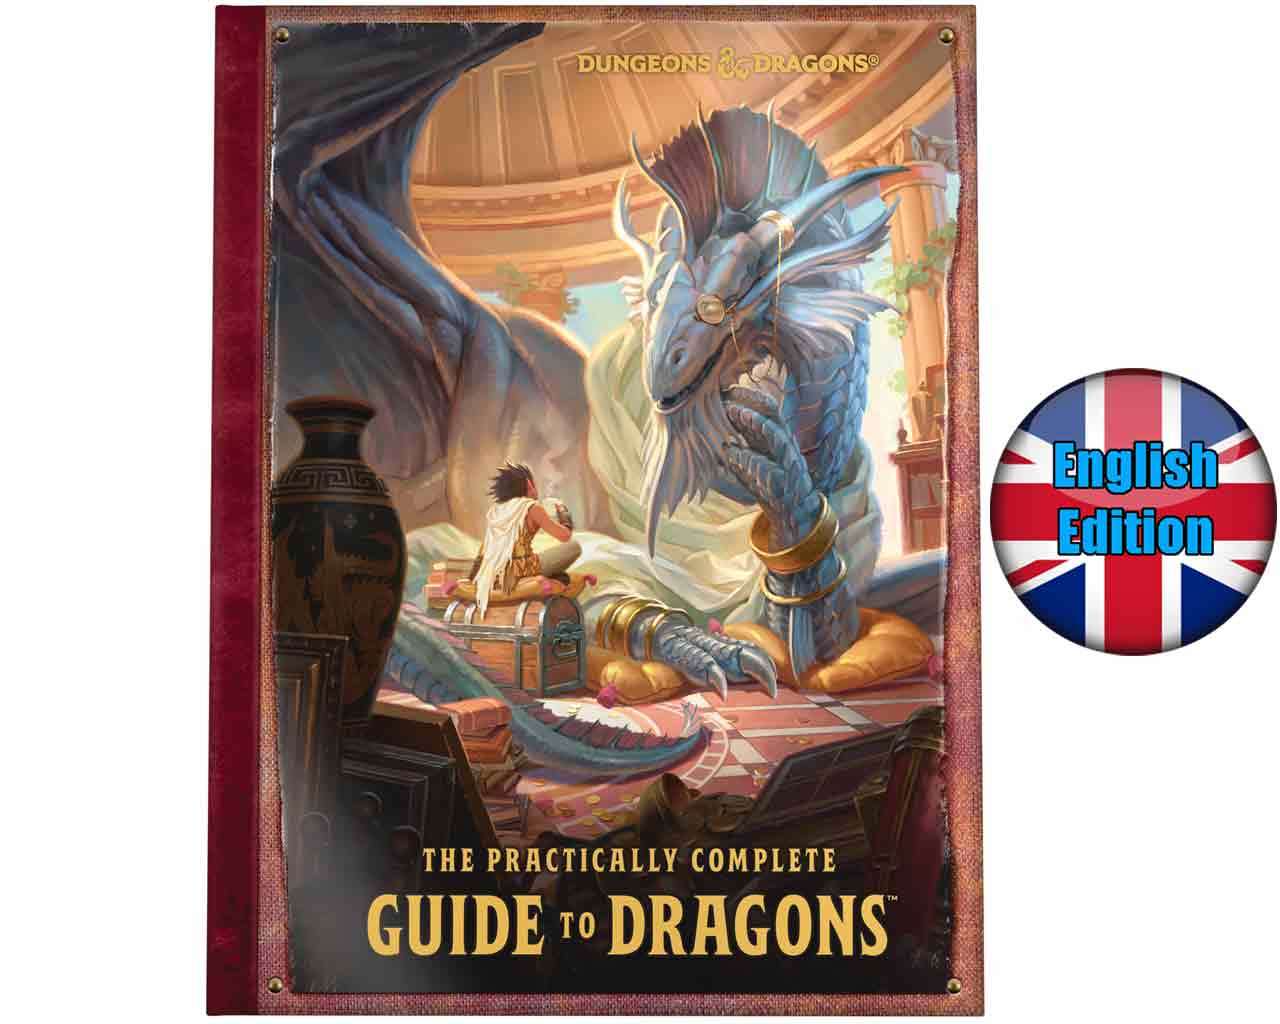 Dungeons & dragons - the practically complete guide to dragons